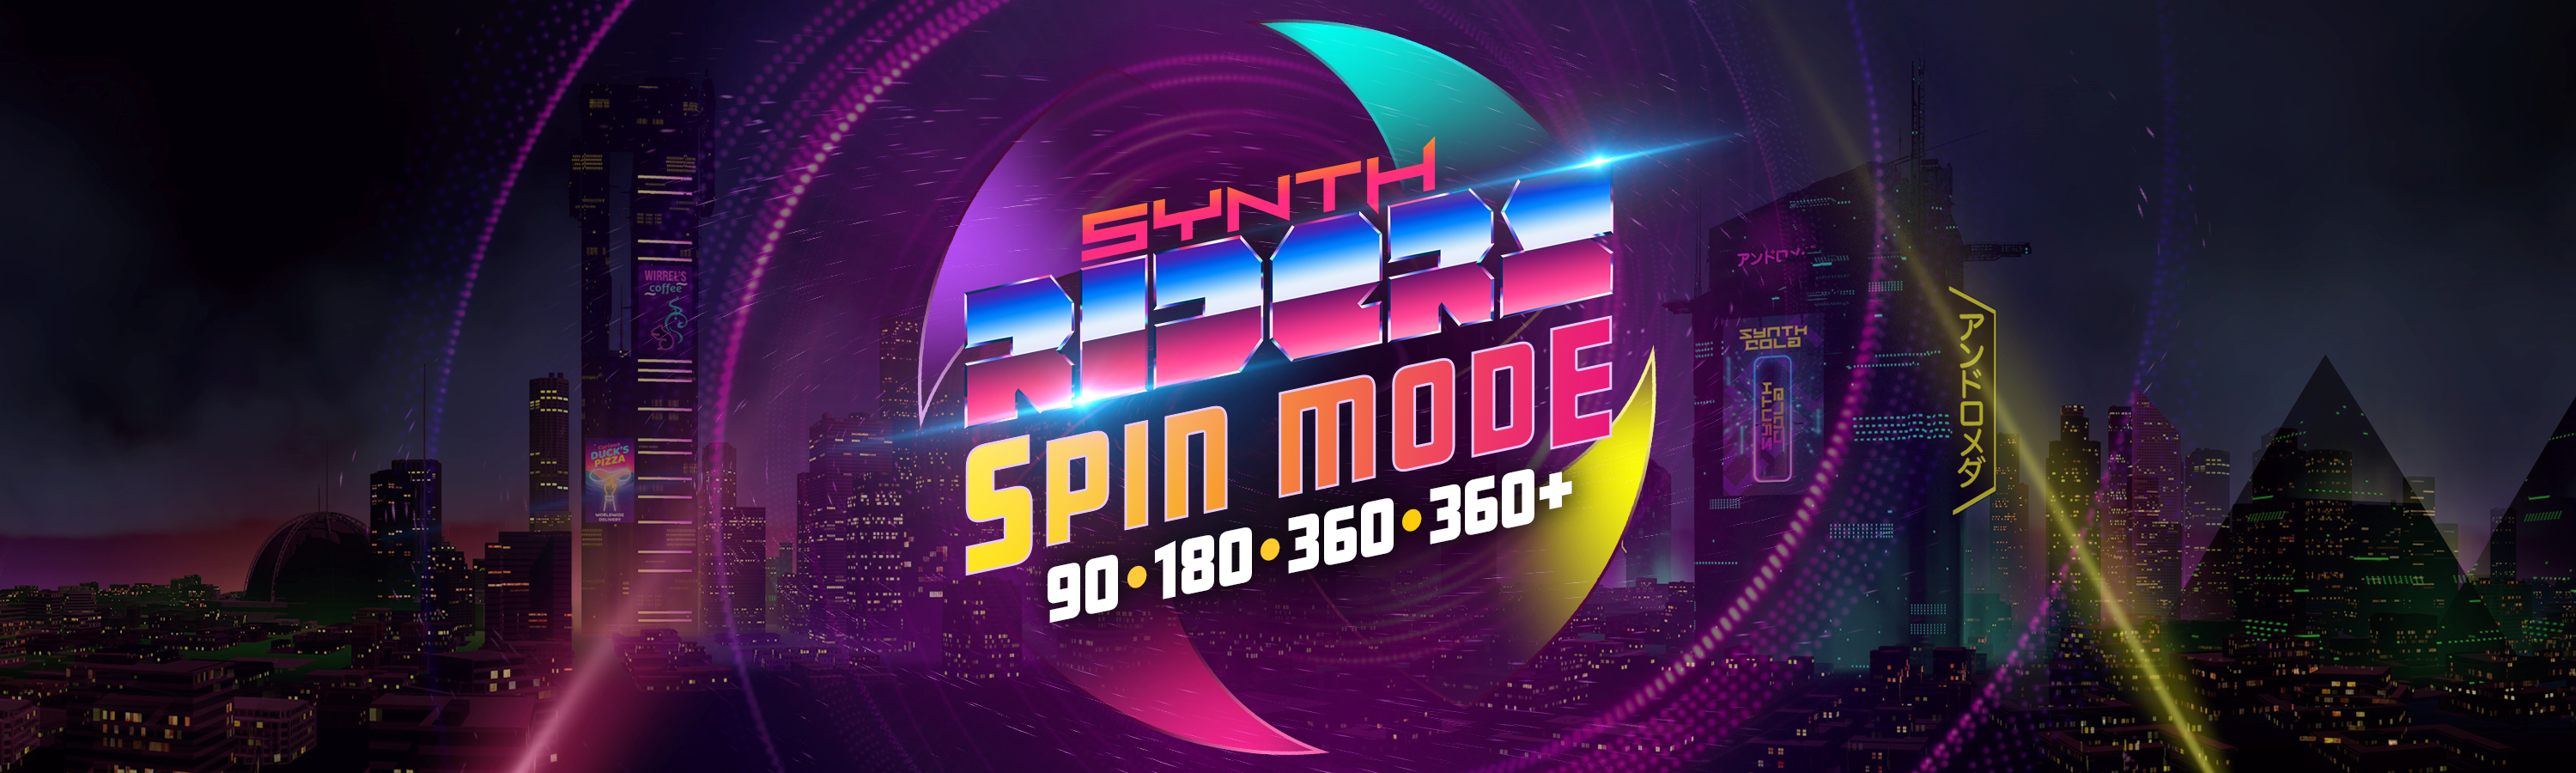 Synth Riders Spin Mode Update